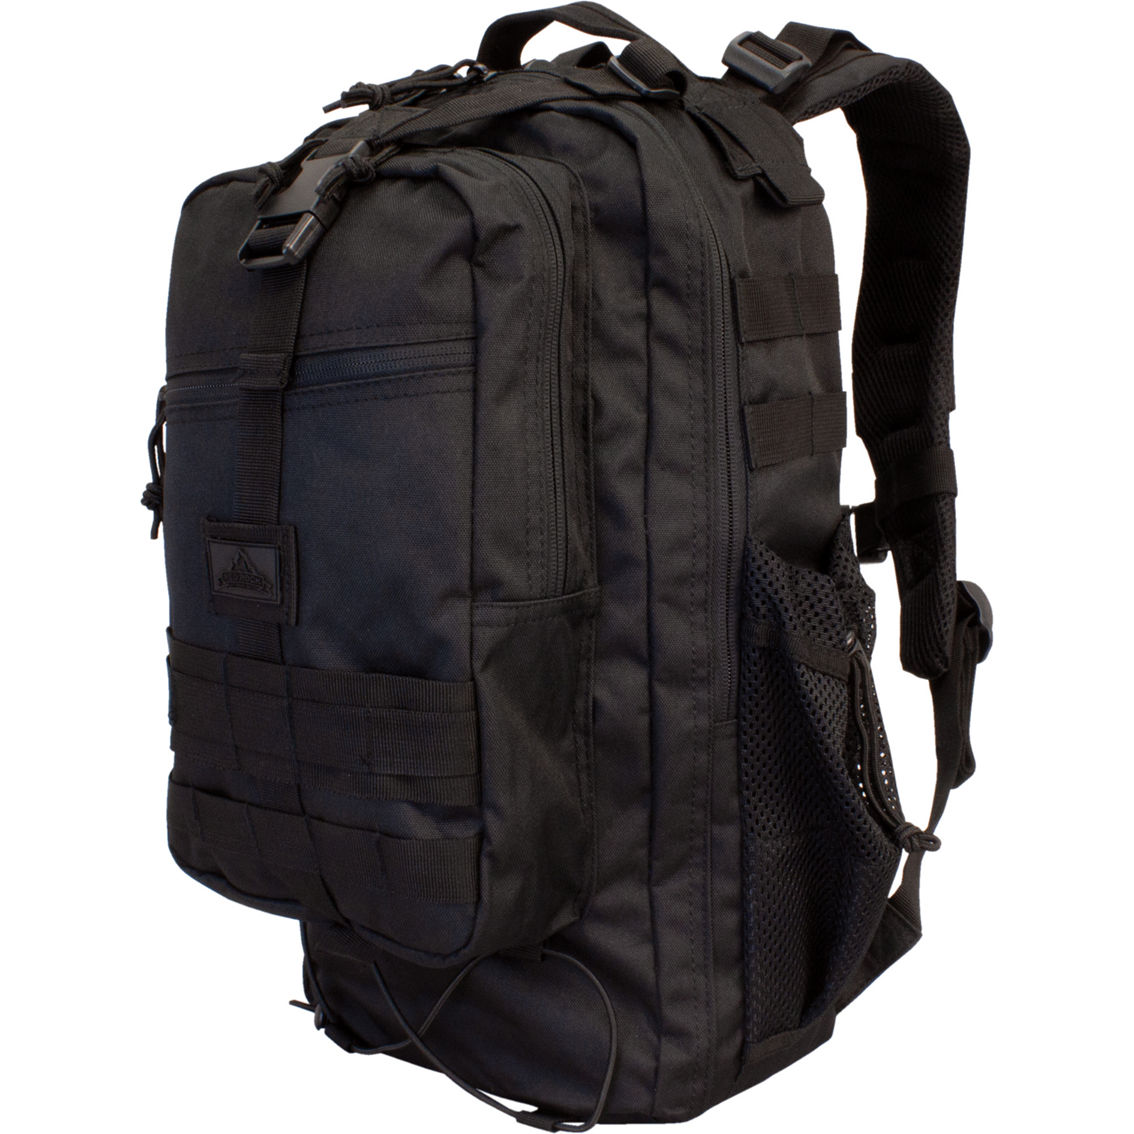 Red Rock Outdoor Gear Summit Backpack - Image 2 of 6